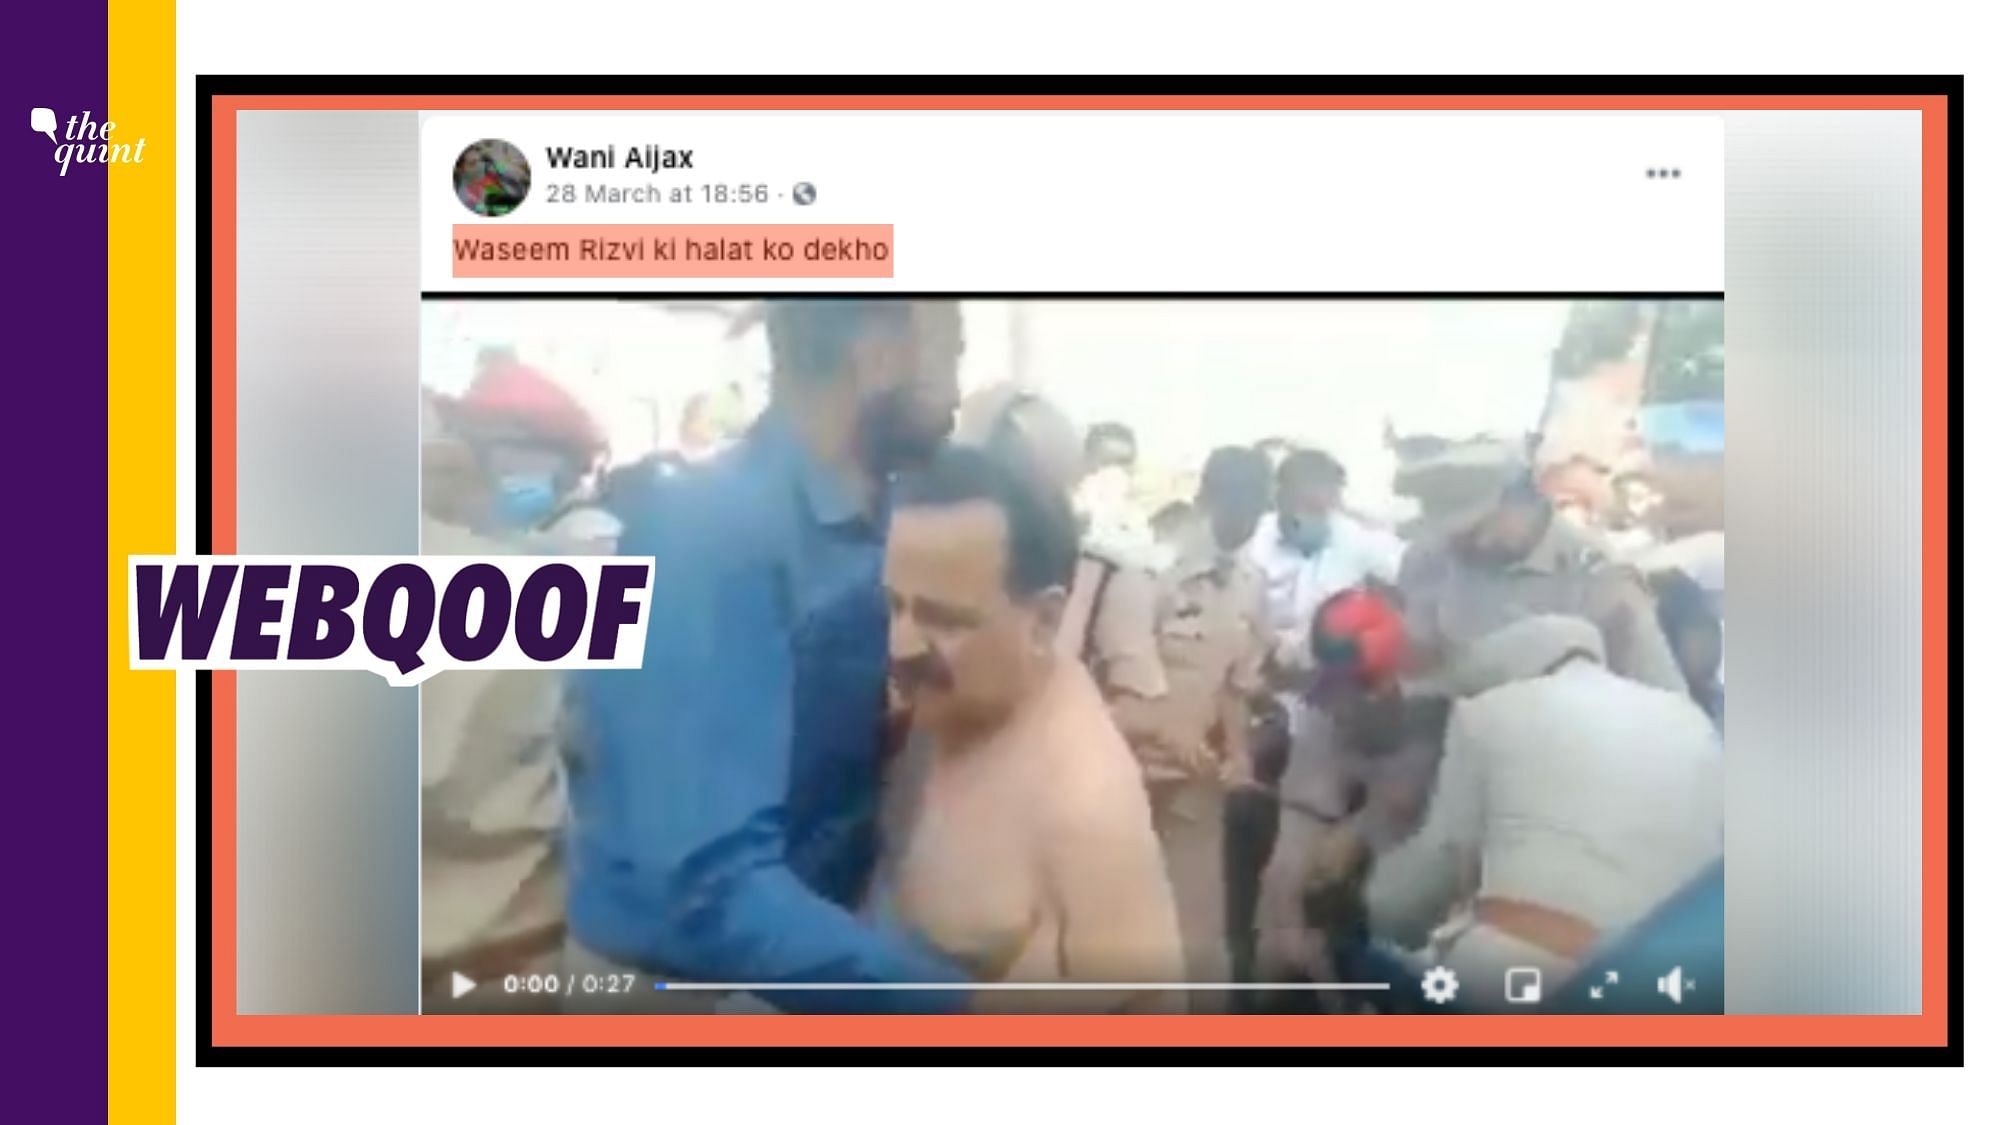 A video of <a href="https://www.thequint.com/topic/farmers-protest">angry farmers</a> thrashing Bharatiya Janata Party (BJP) MLA Arun Narang in Punjab is being shared on social media as that of former Shia leader Wasim Rizvi.